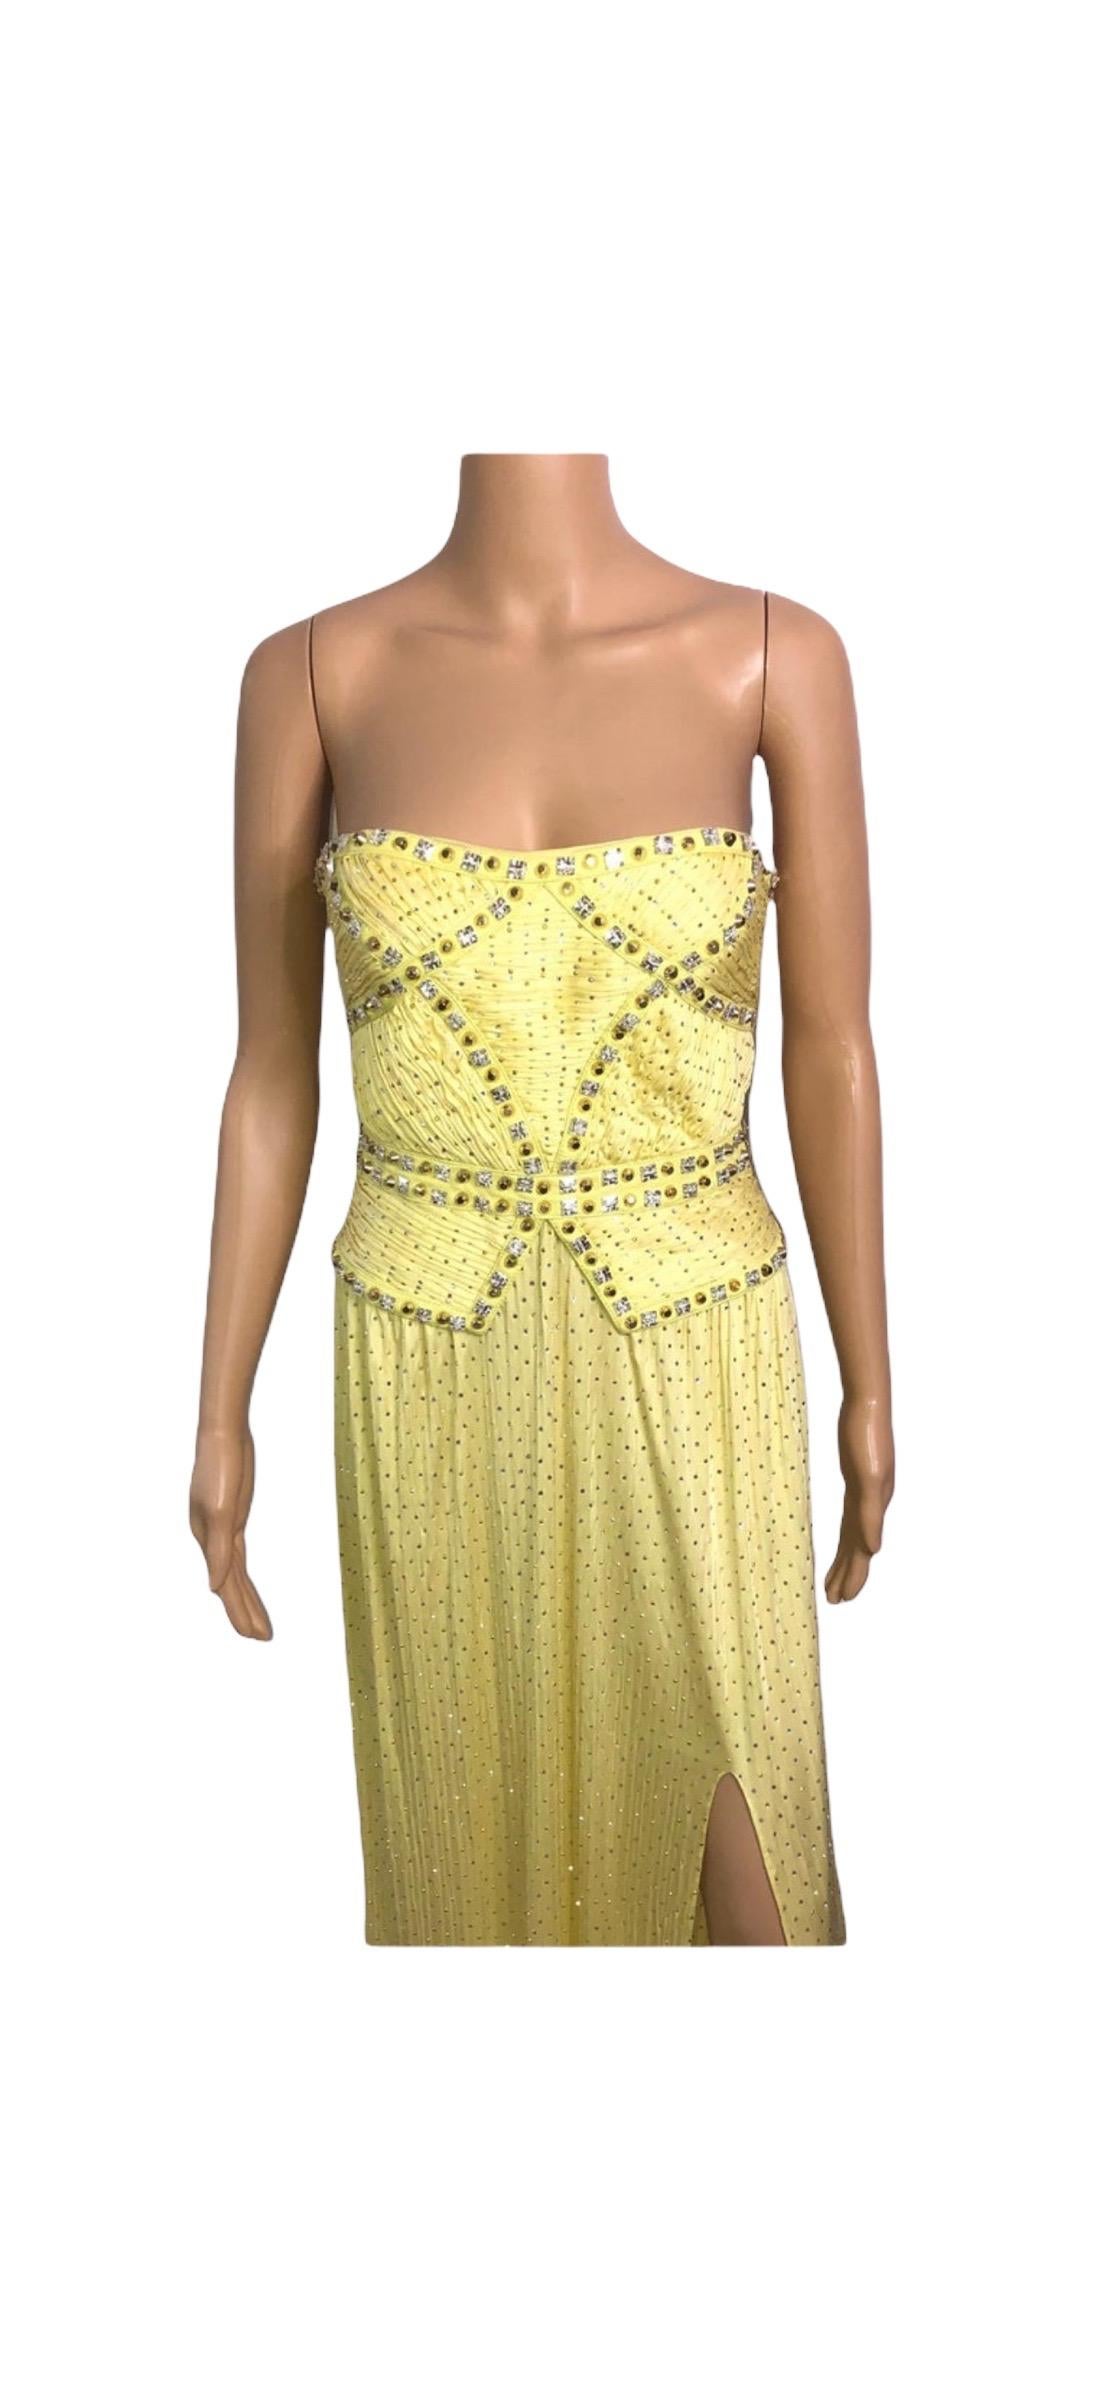 Versace S/S 2012 Runway Bustier Corset Crystal Embellished Evening Dress Gown  For Sale 8